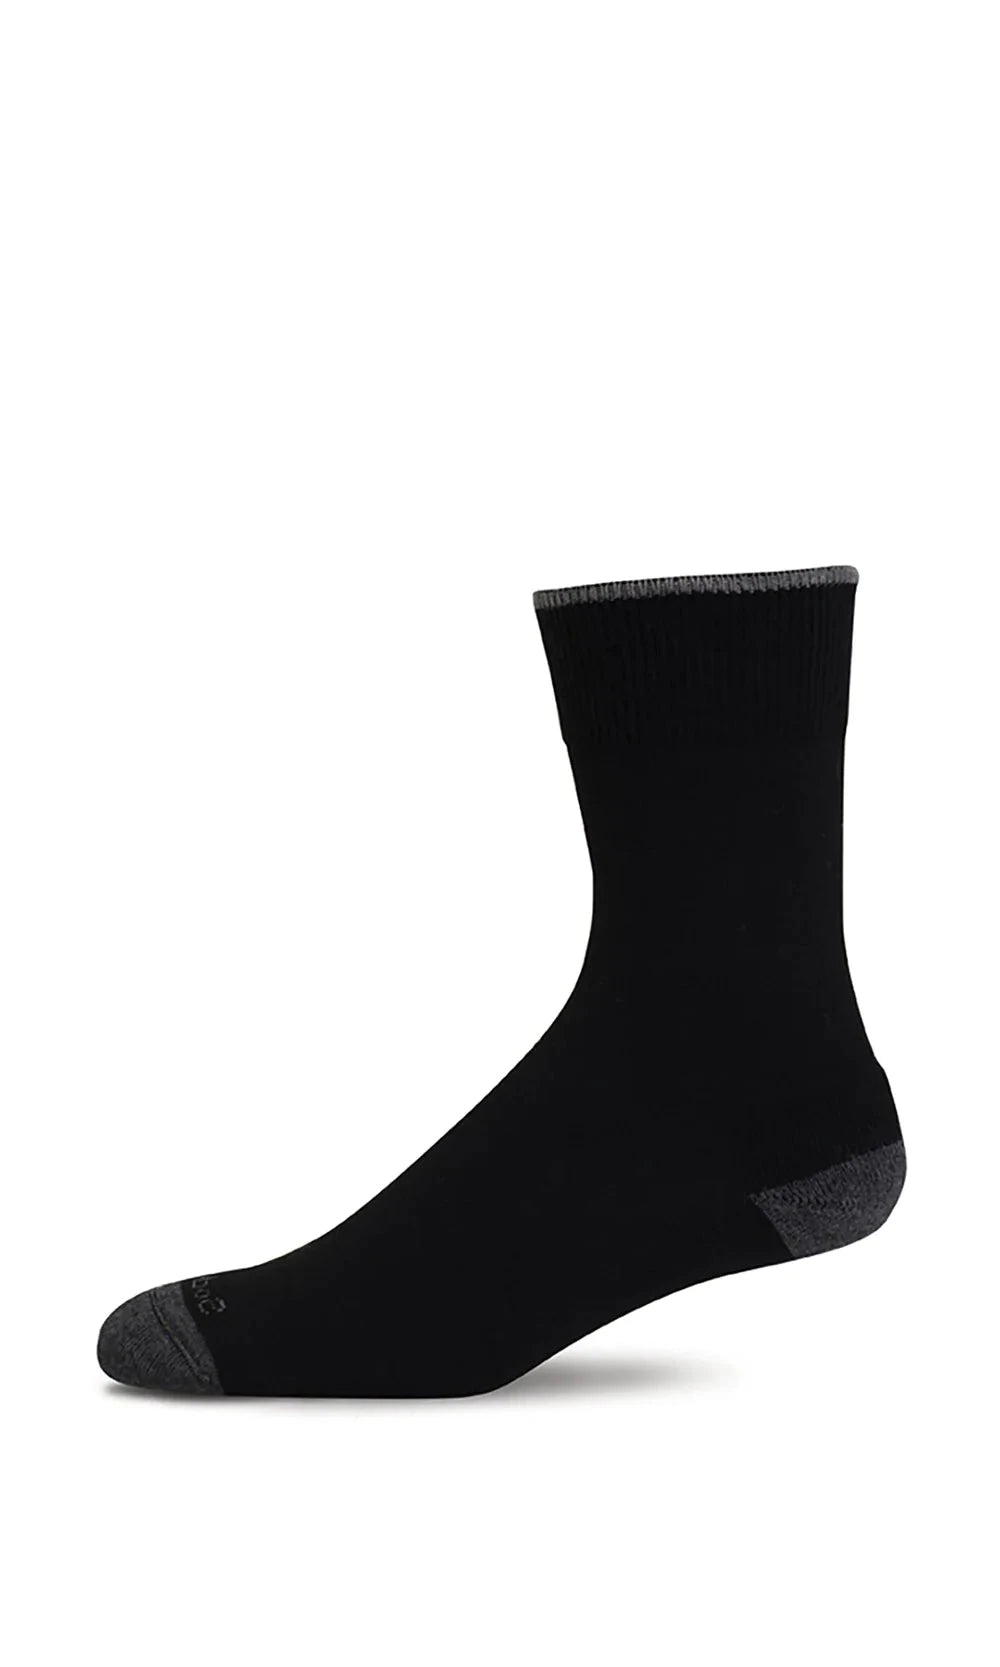 Easy Does It | Relaxed Fit | Black - Socks - Sockwell